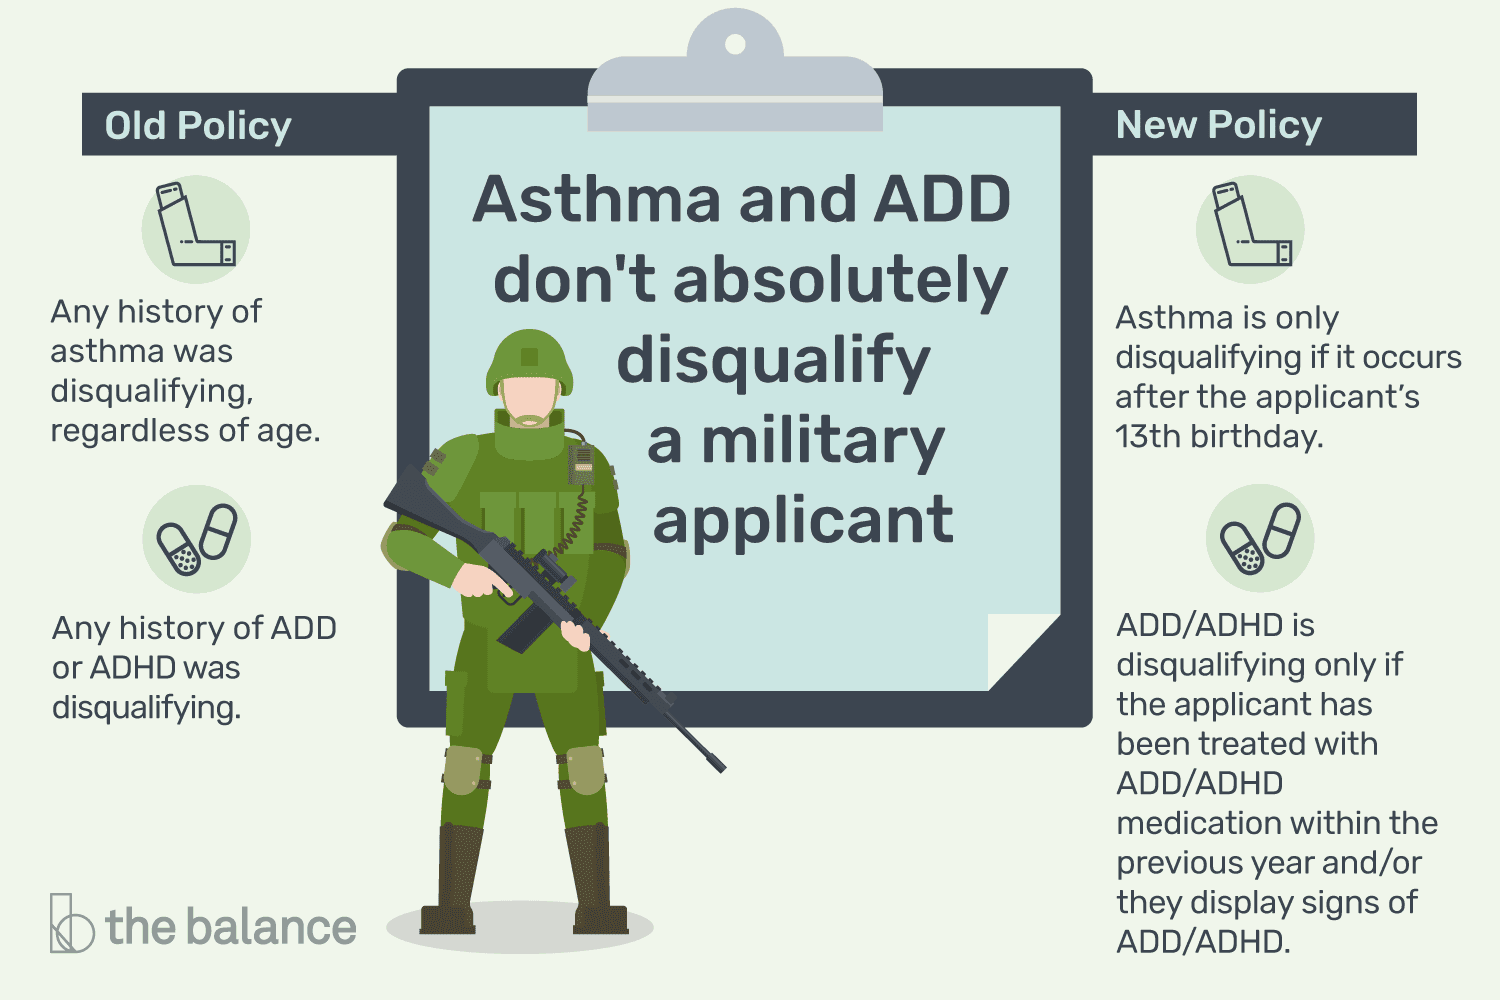 US Military Asthma and ADD/ADHD Policy